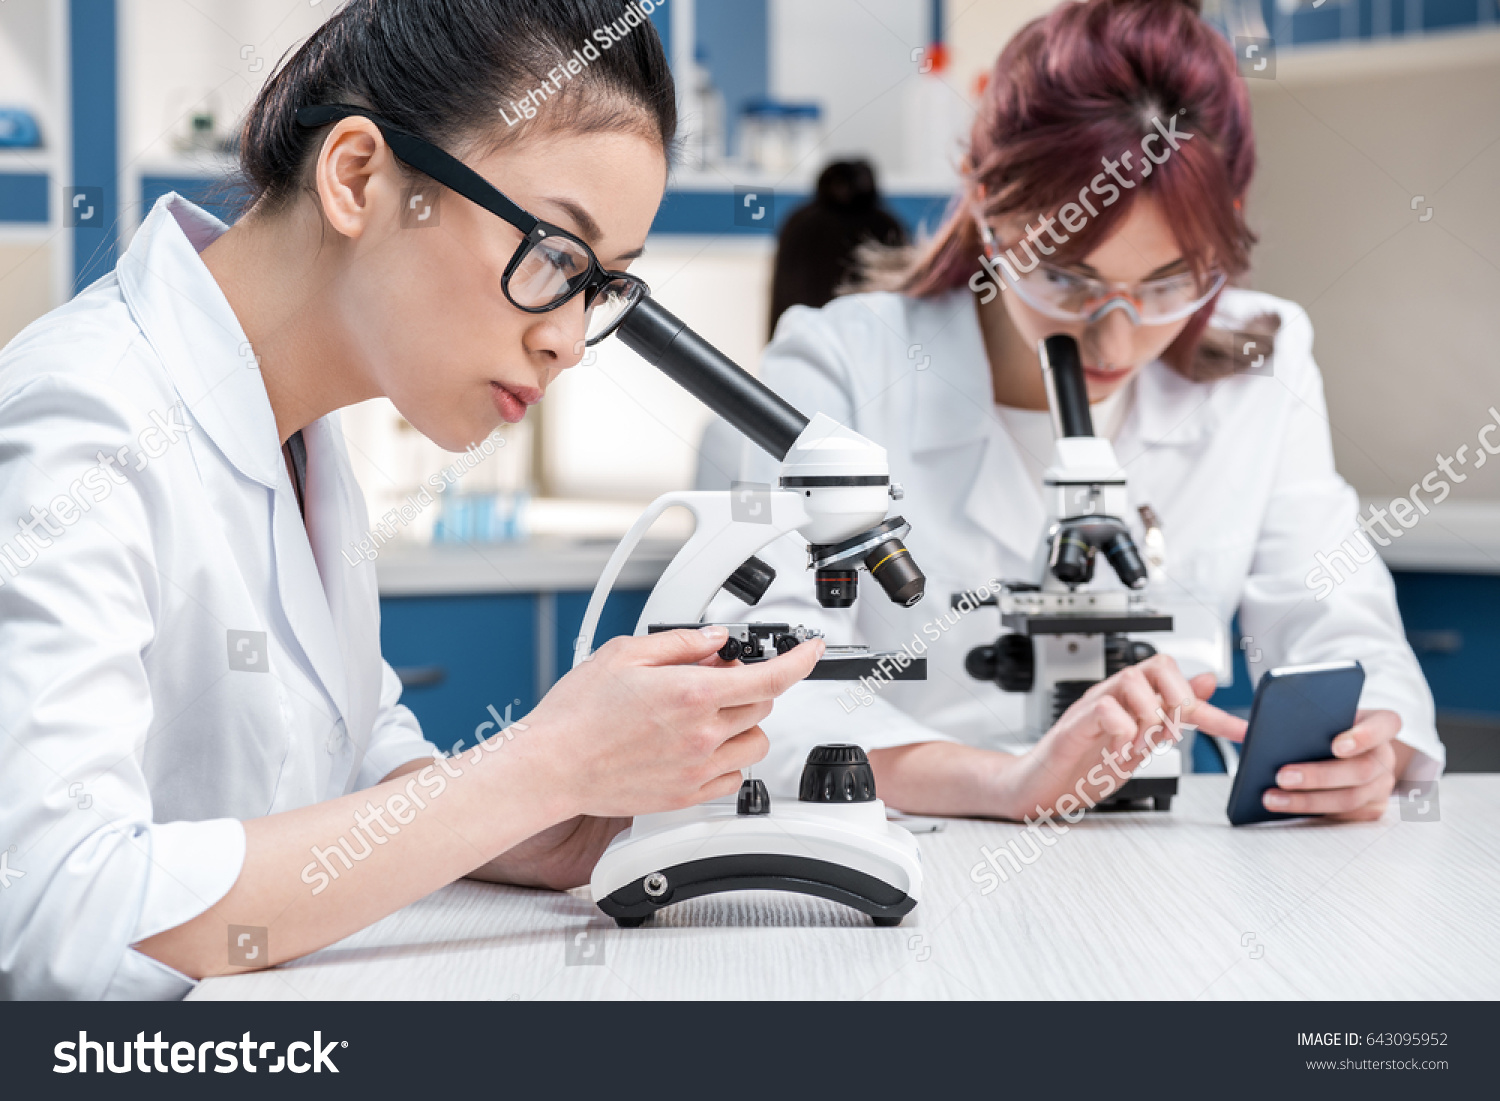 scientists group working with microscopes and smartphone in chemical lab, lab scientists concept #643095952